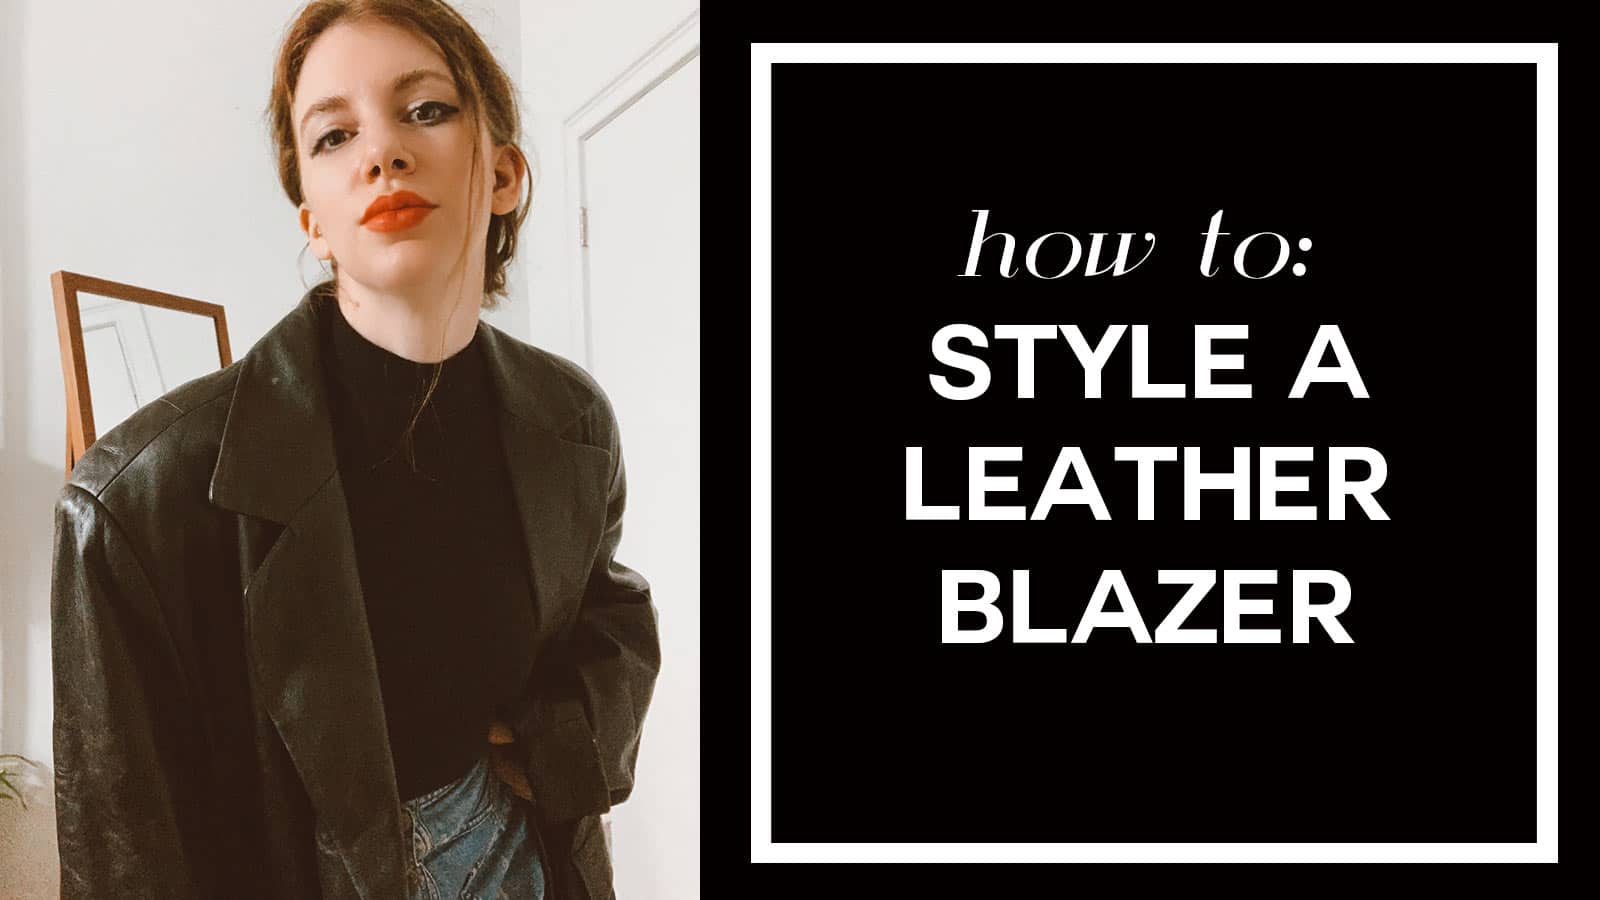 How to style a leather blazer + foolproof leather blazer outfit ideas